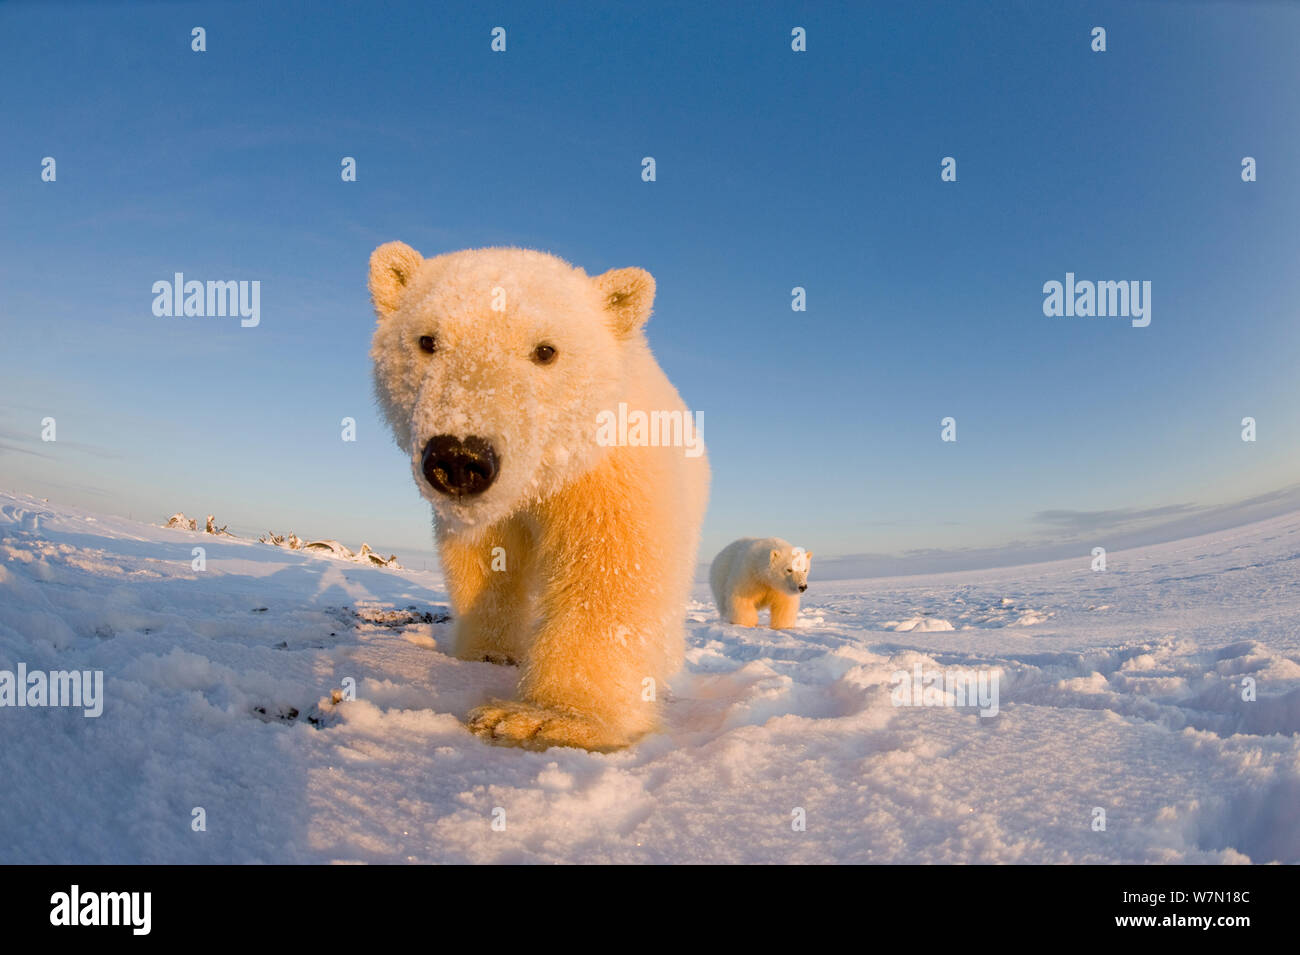 Two young Polar bears (Ursus maritimus) during the autumn freeze up, Barter Island, off the 1002 area of the Arctic National Wildlife Refuge, North Slope of the Brooks Range, Alaska, October 2011 Stock Photo